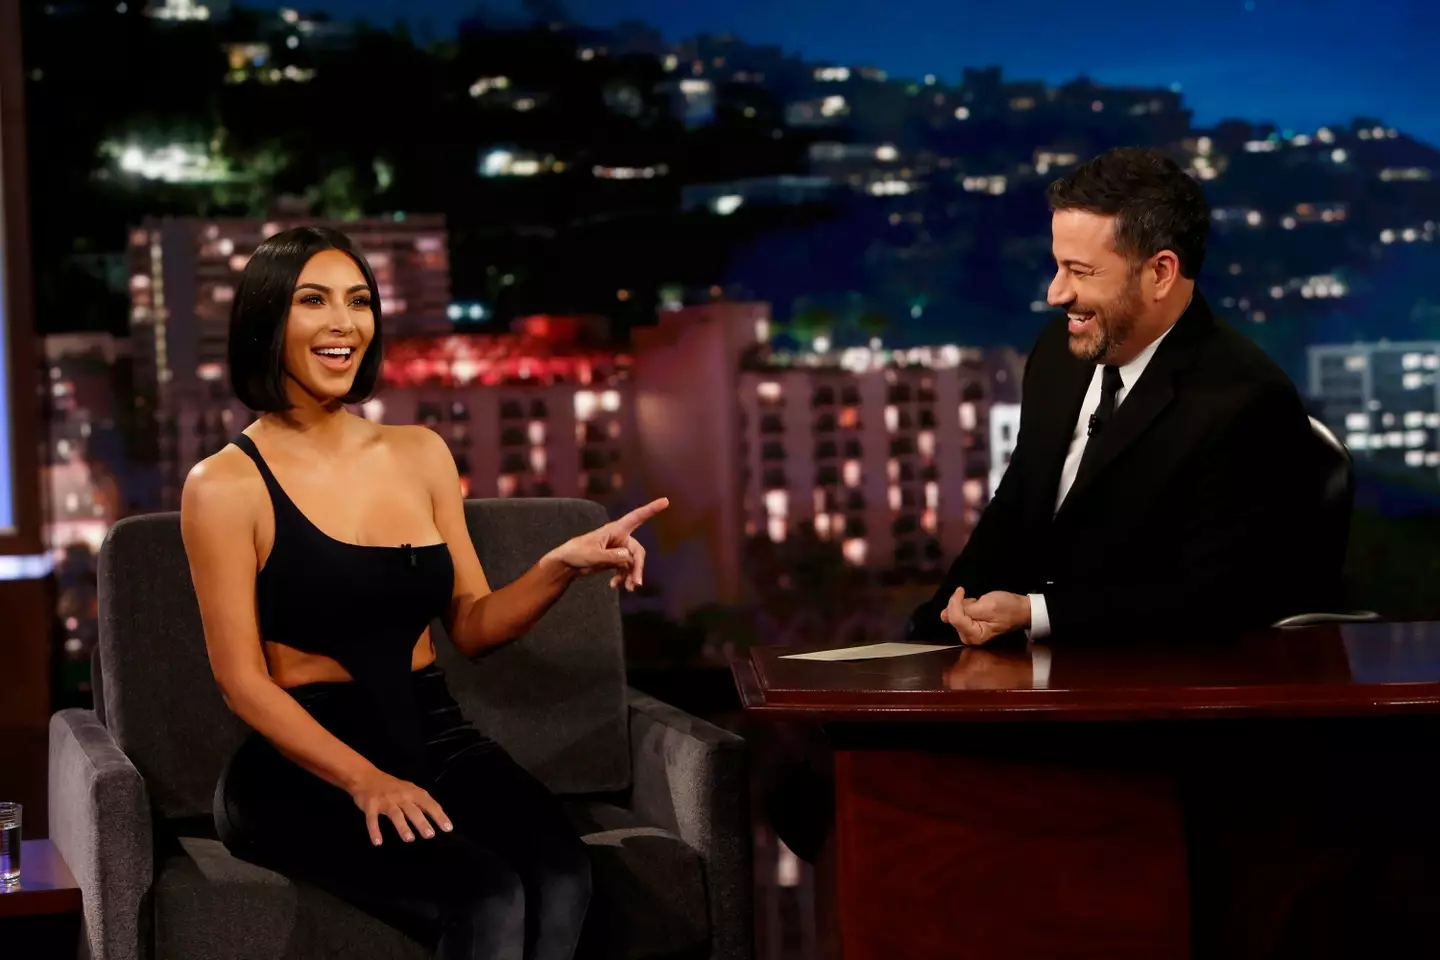 Kim made her confession on Jimmy Kimmel Live! (Randy Holmes via Getty Images)